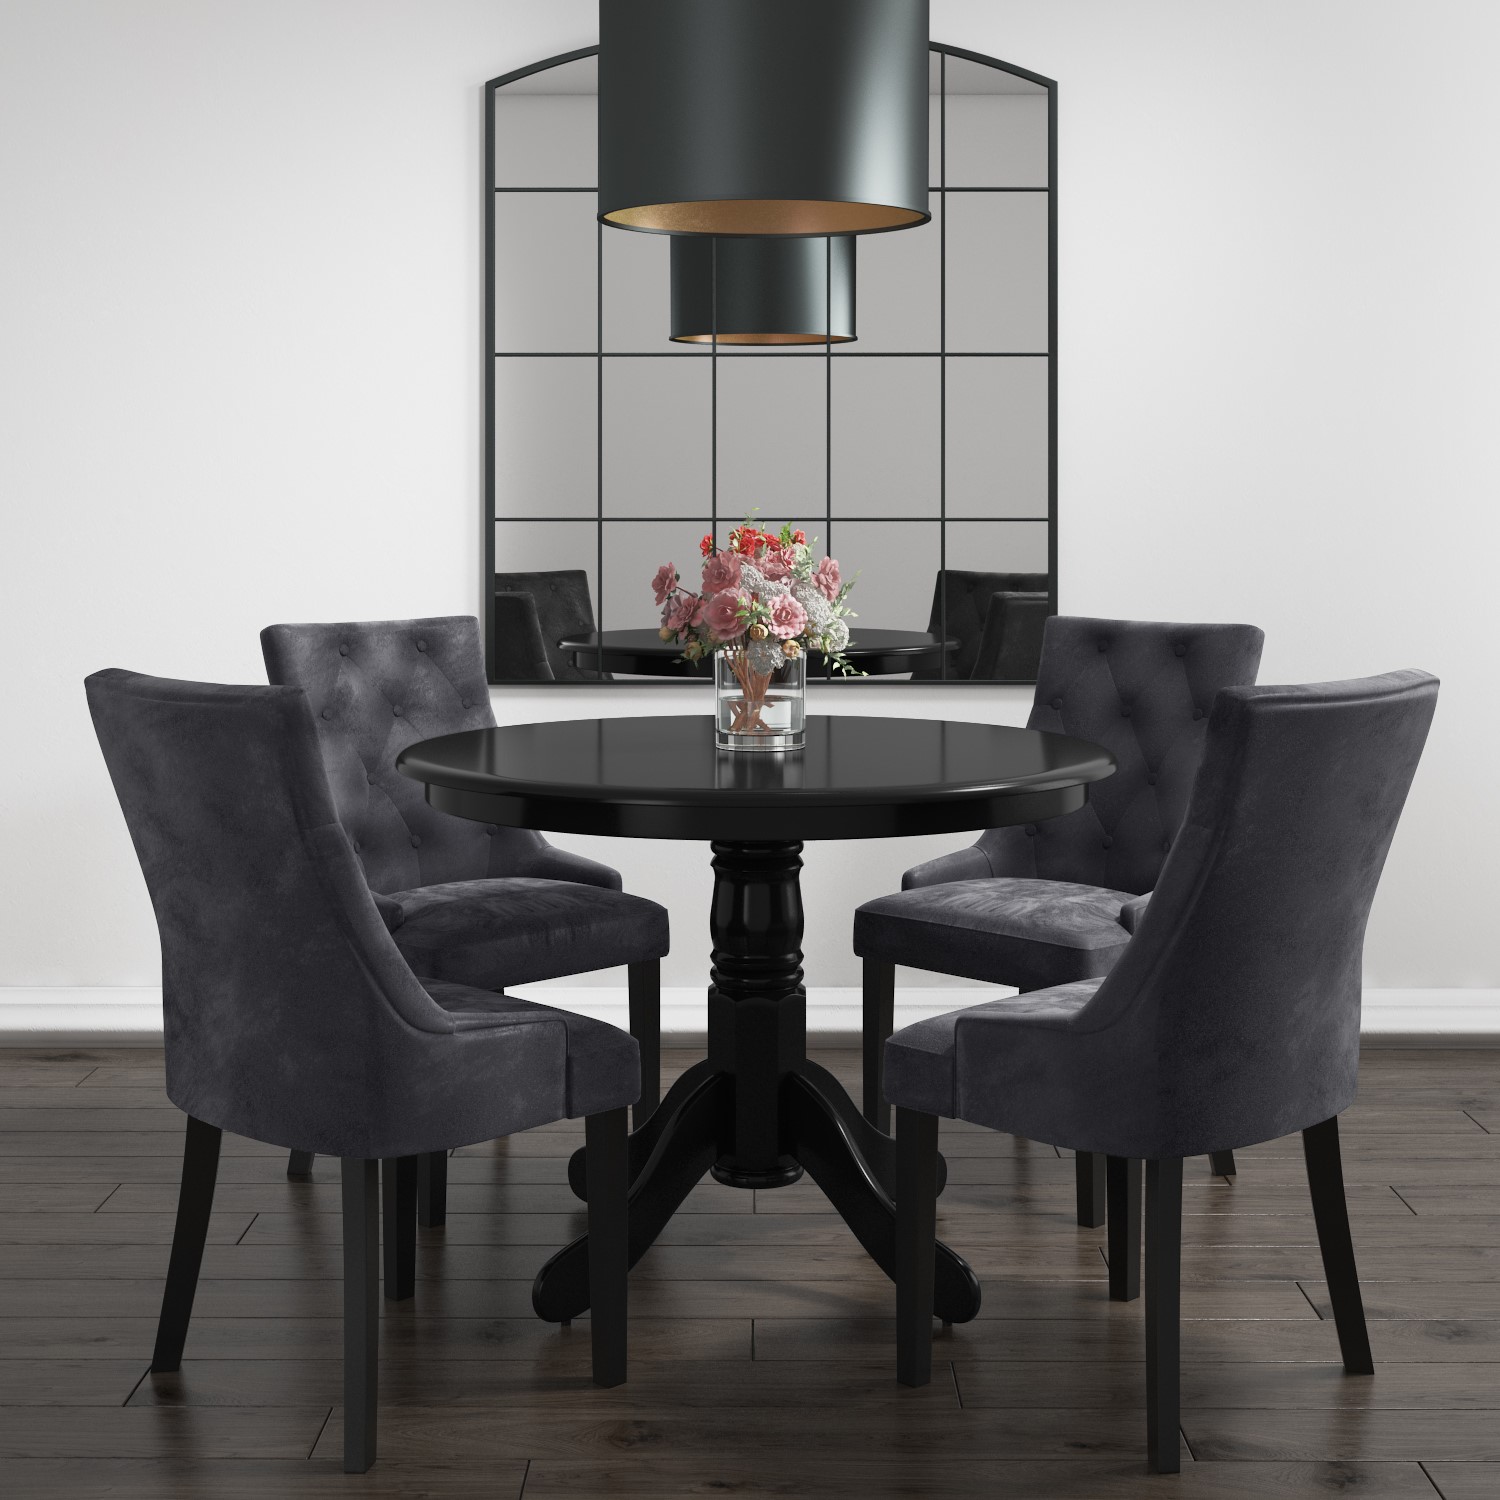 Small Round Dining Table In Black With, Small Round Black Table And Chairs